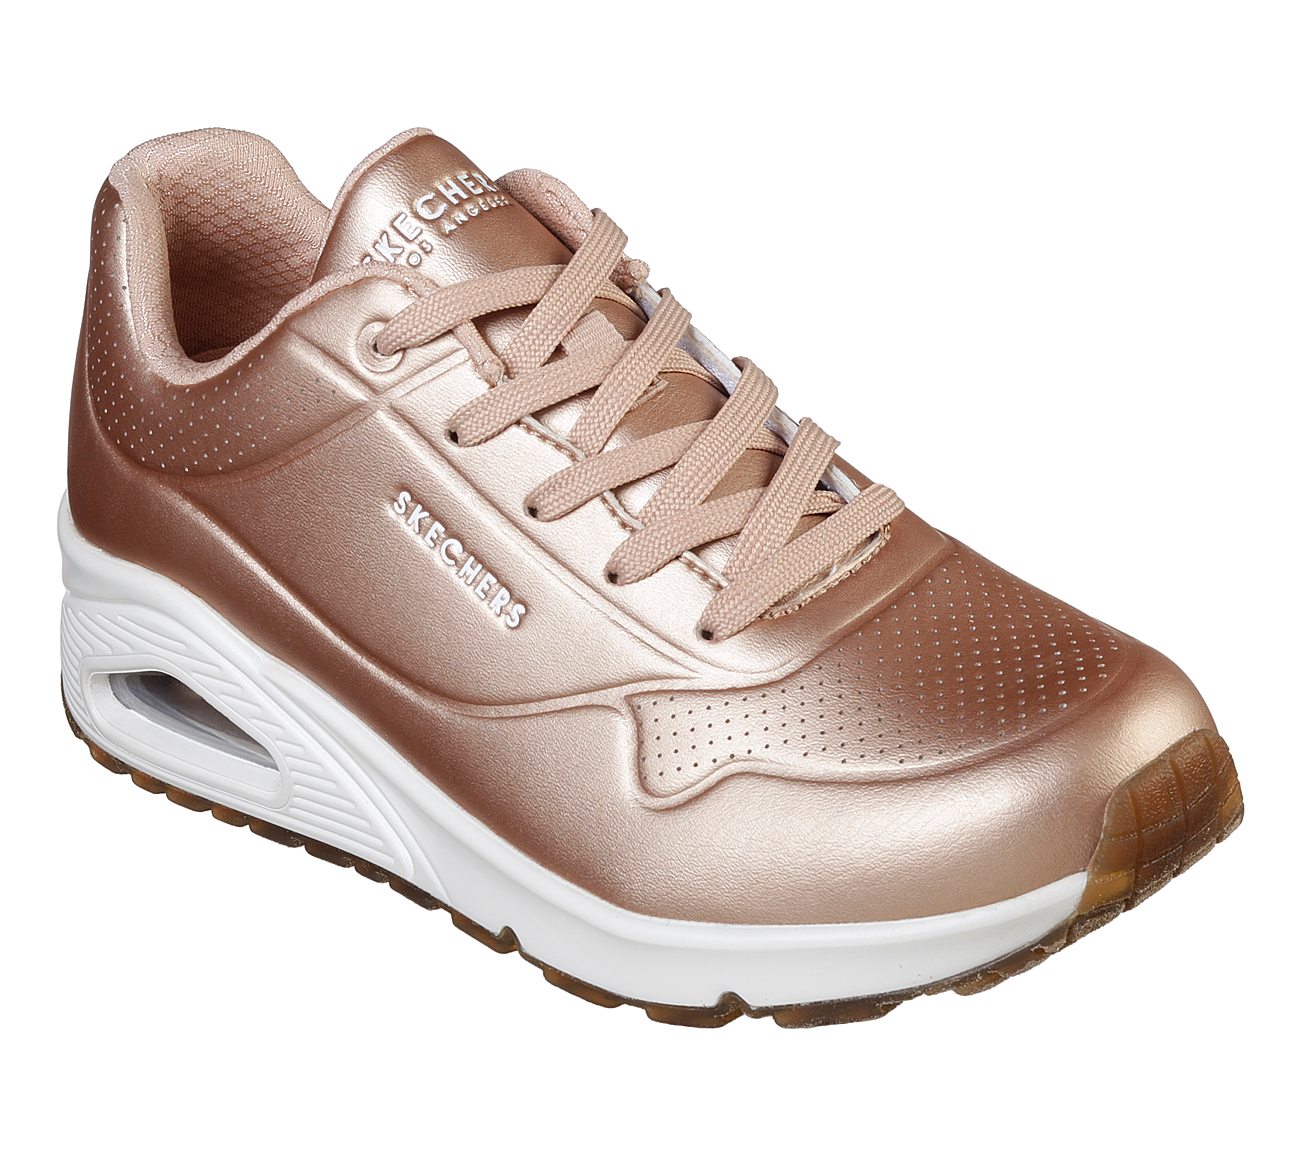 skechers shoes rose gold